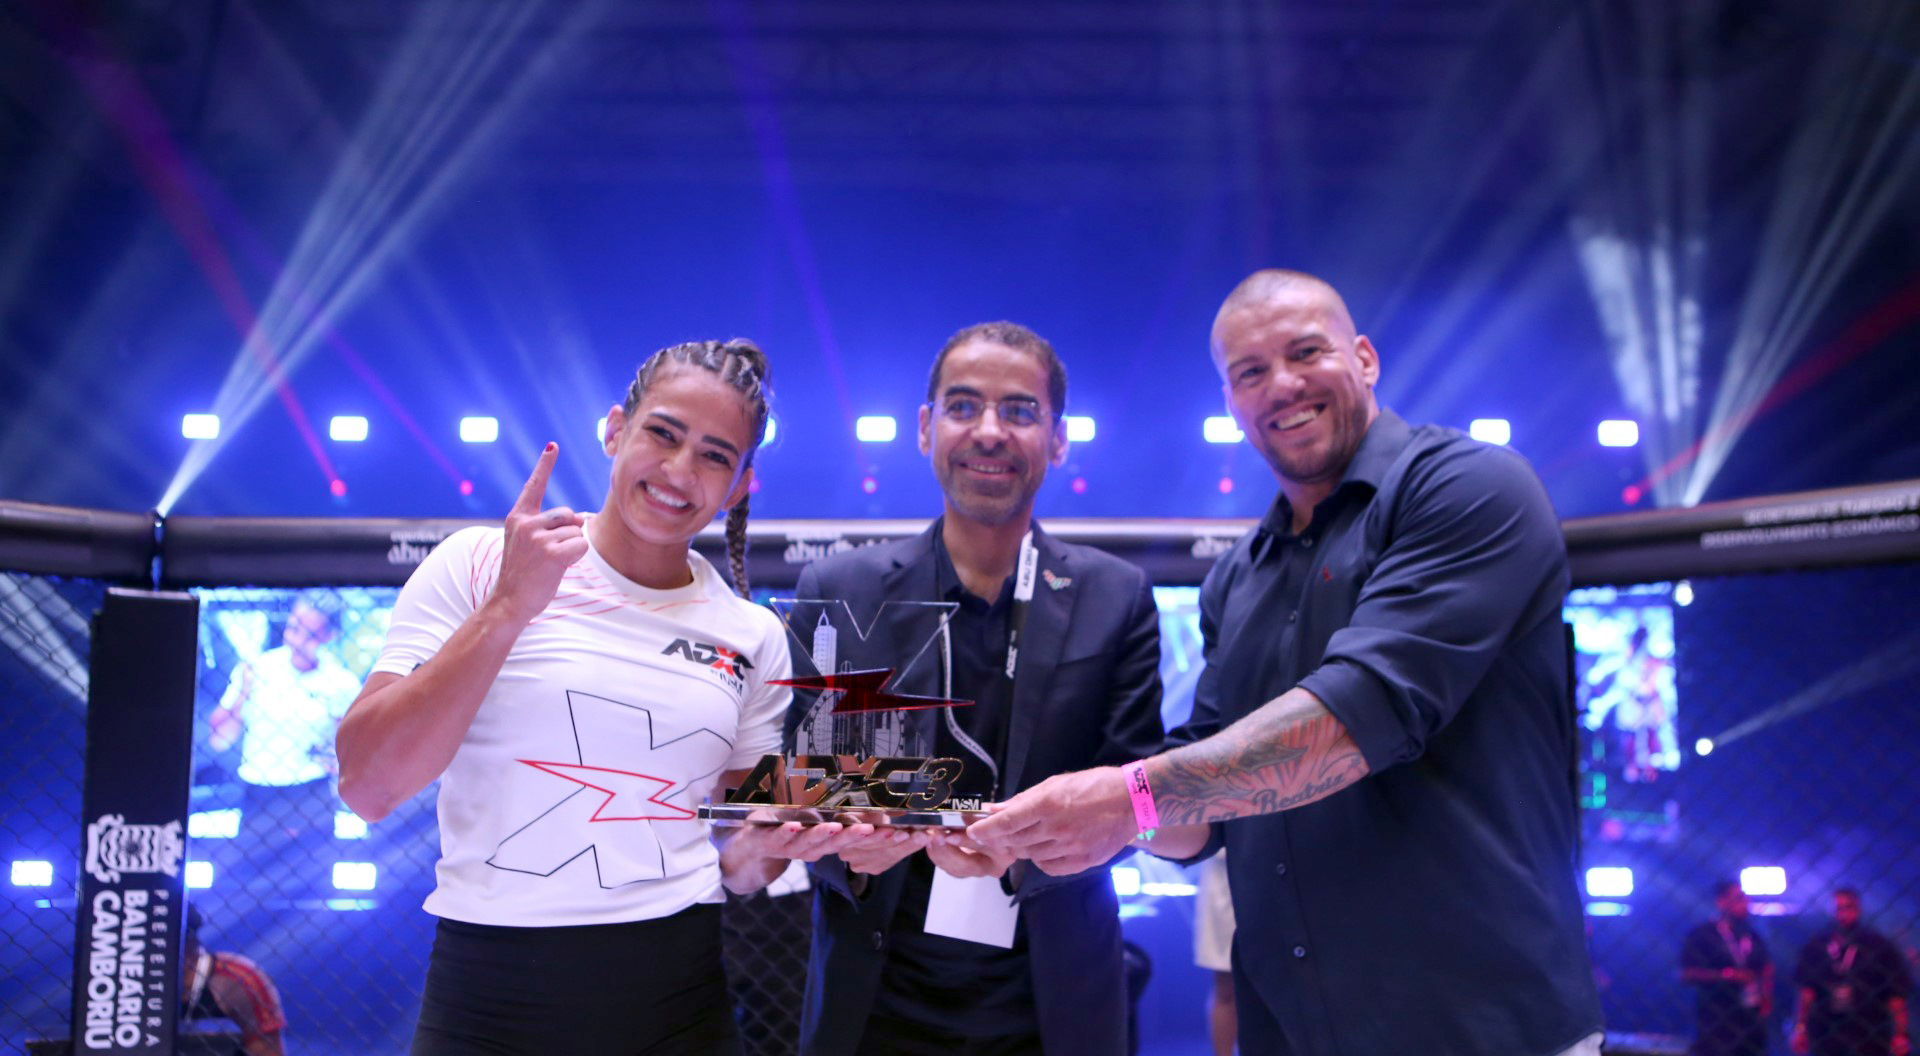 uae's rising star alkatheeri joins fellow fighters as adxc 3 champions